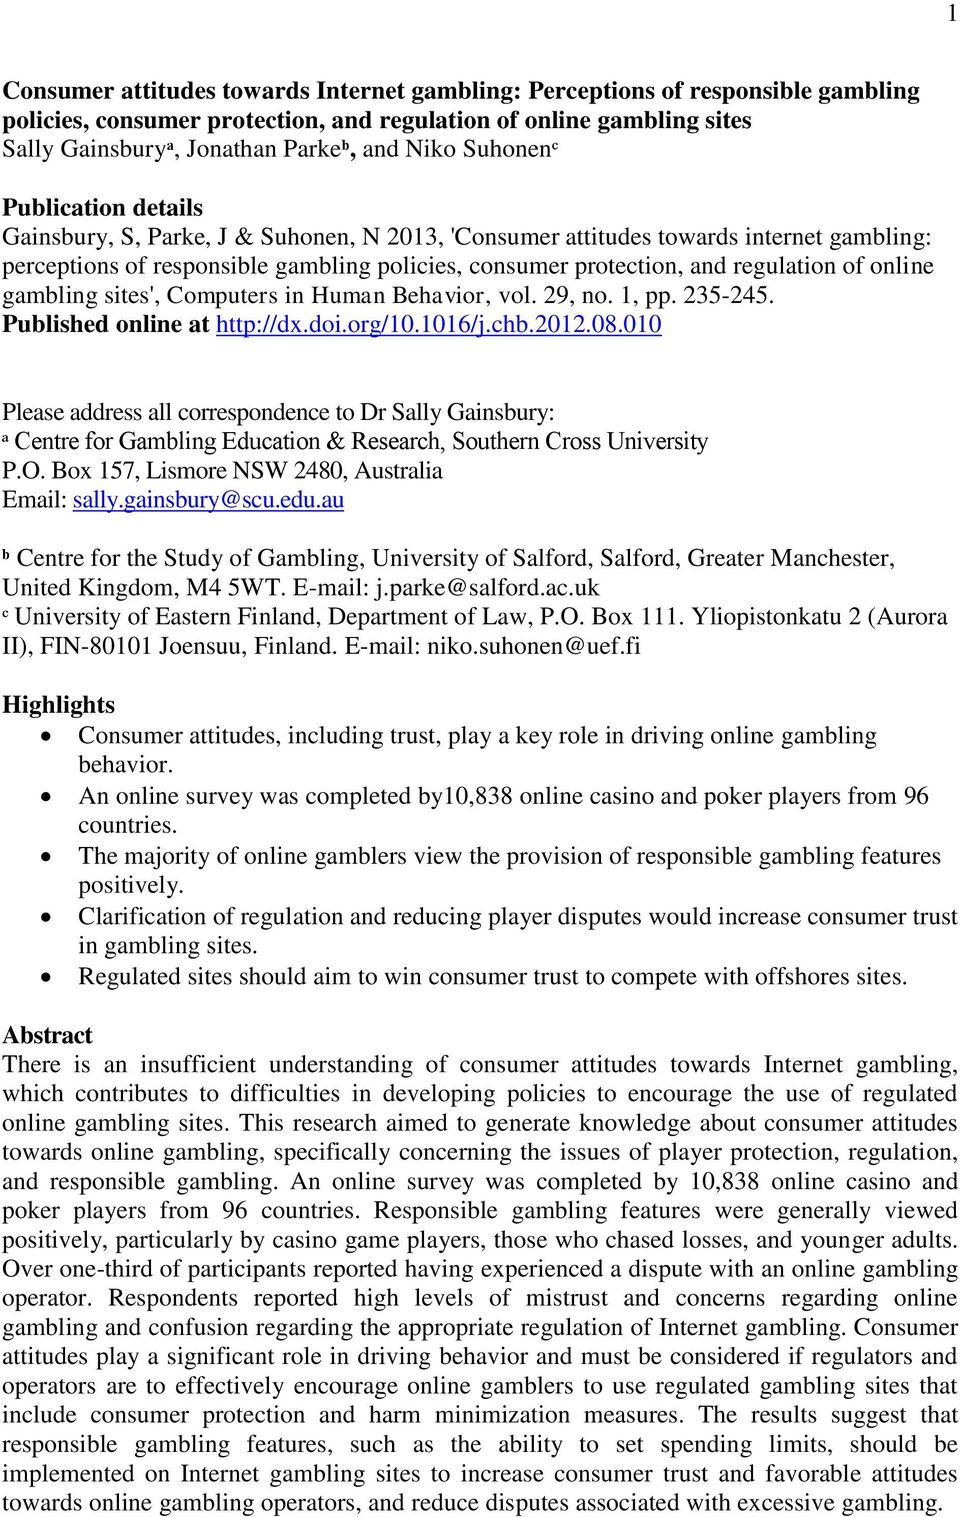 of online gambling sites', Computers in Human Behavior, vol. 29, no. 1, pp. 235-245. Published online at http://dx.doi.org/10.1016/j.chb.2012.08.